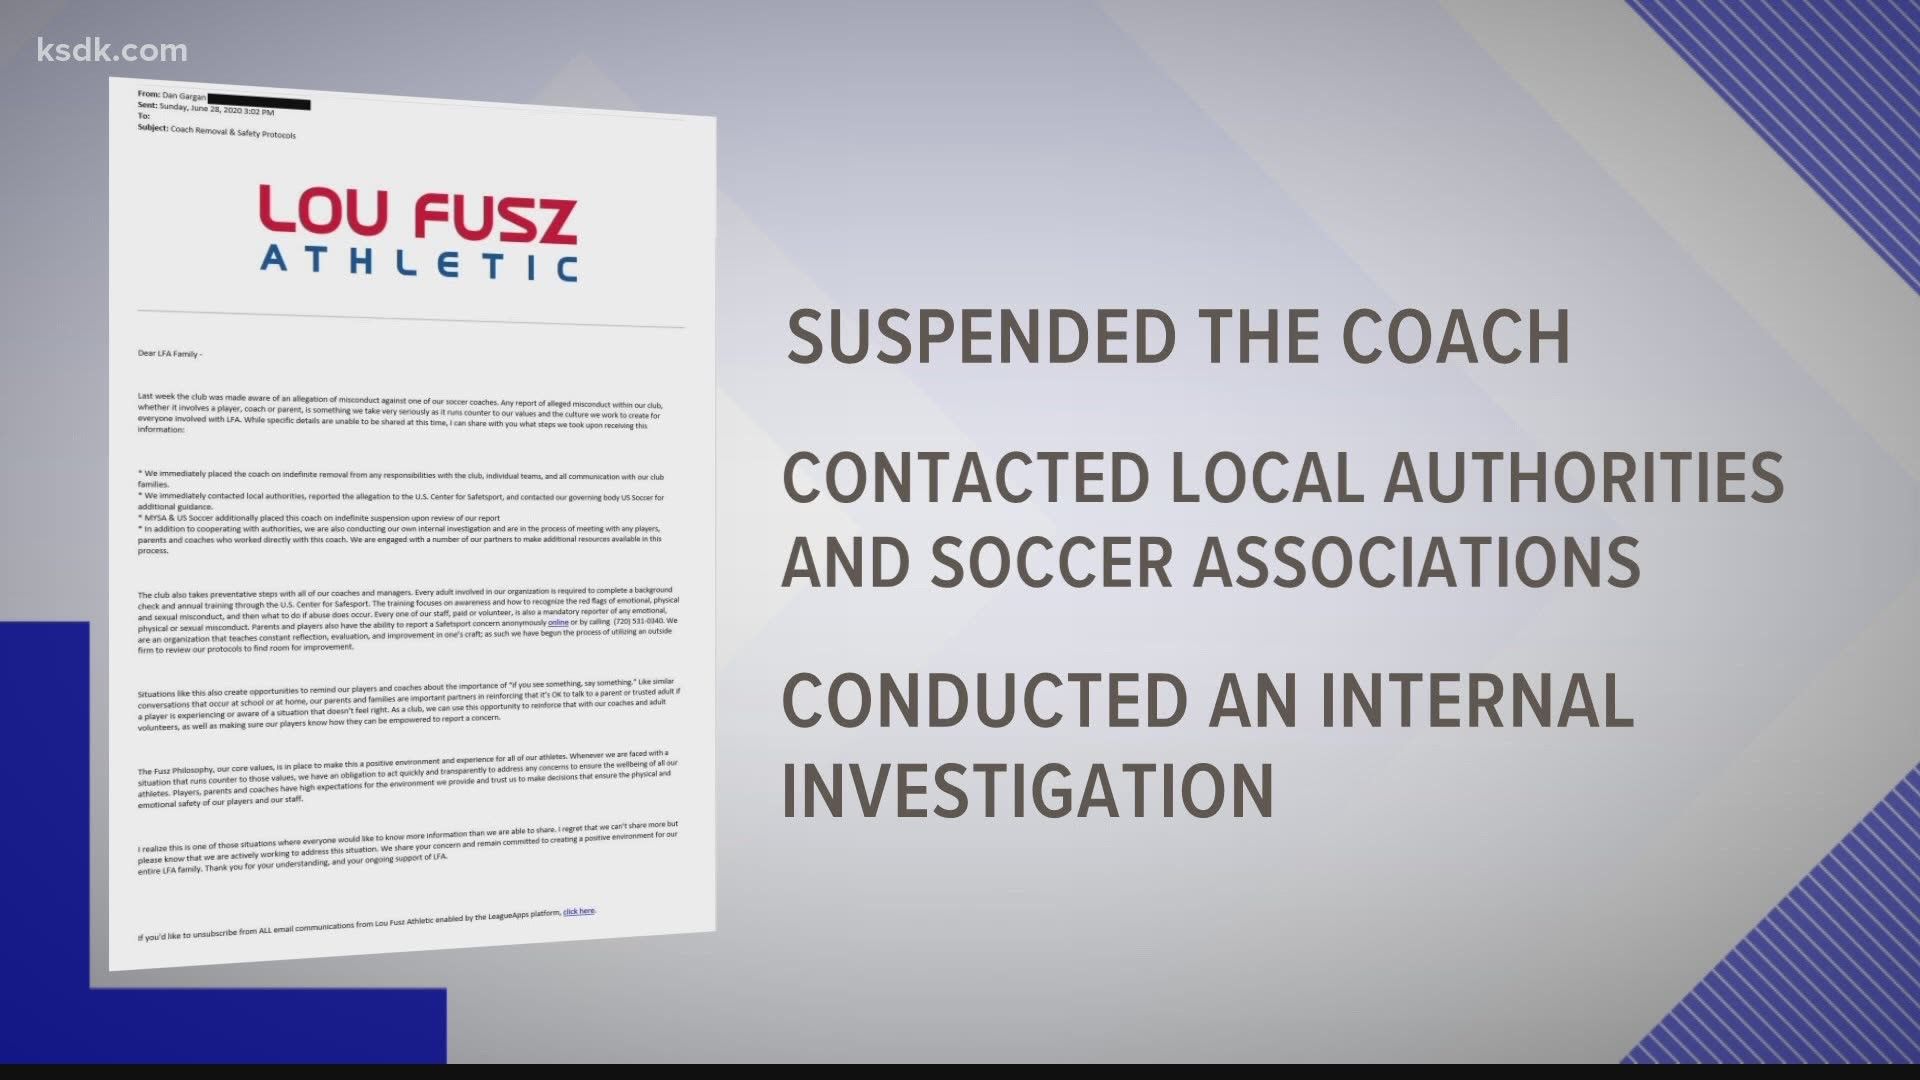 St. Louis: Player accuses Lou Fusz soccer coach of sexual abuse | 0